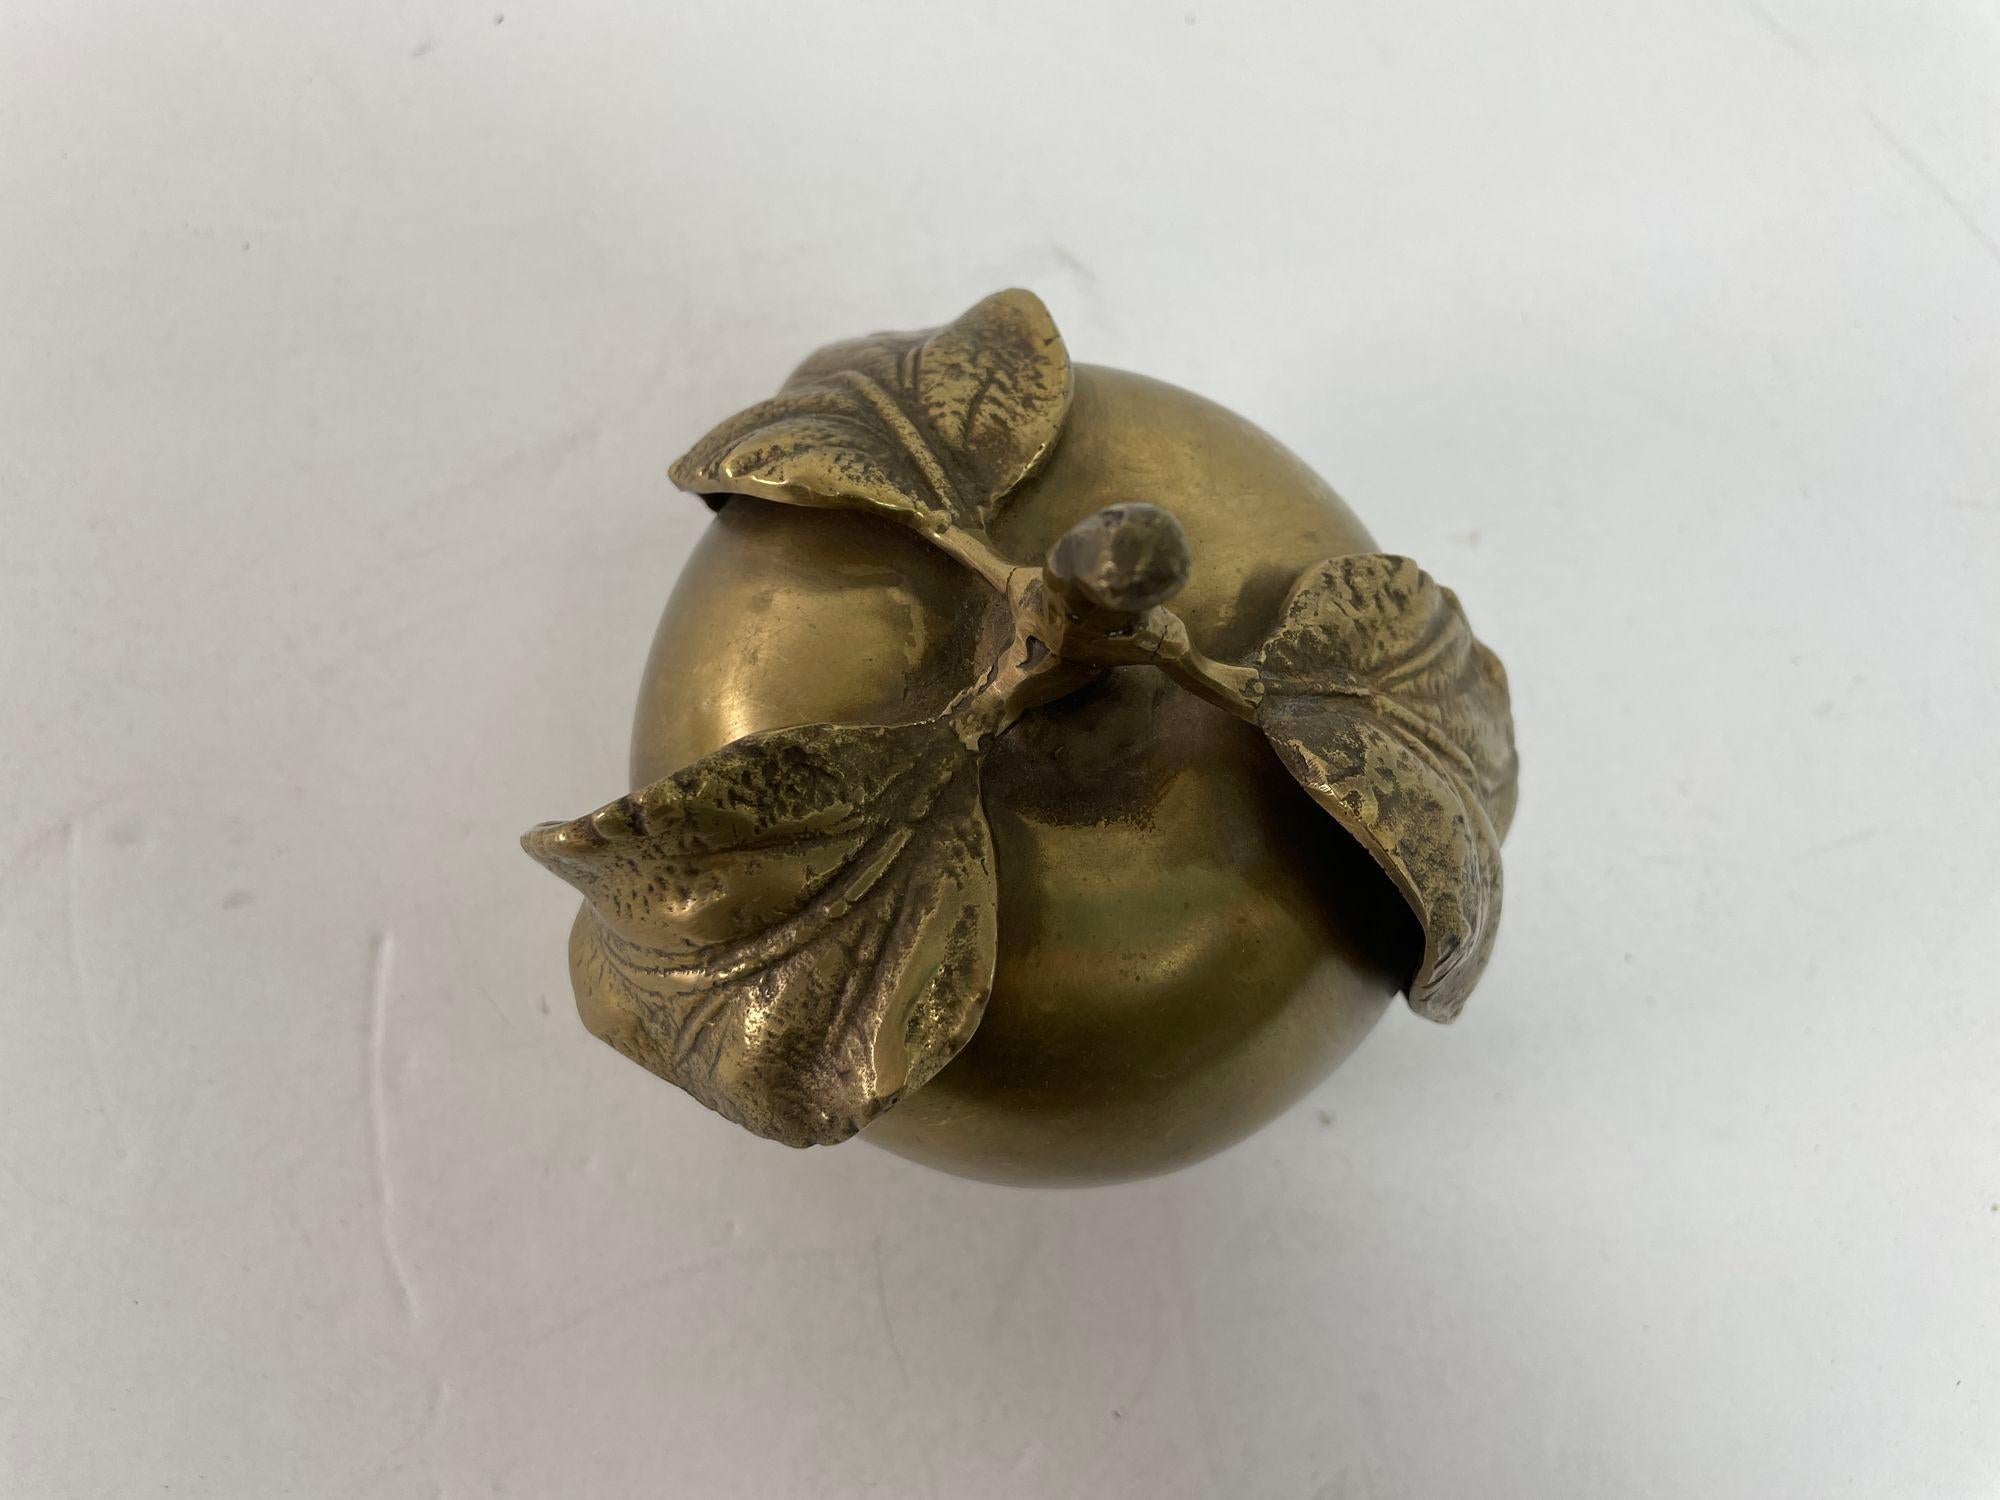 Vintage brass apple sculpture paperweight in very good condition with a light patina all around.
Polished brass apple with 3 leaves with fine details, heavy weight to use as a paperweight or just a decorative vintage Art object on a desk or